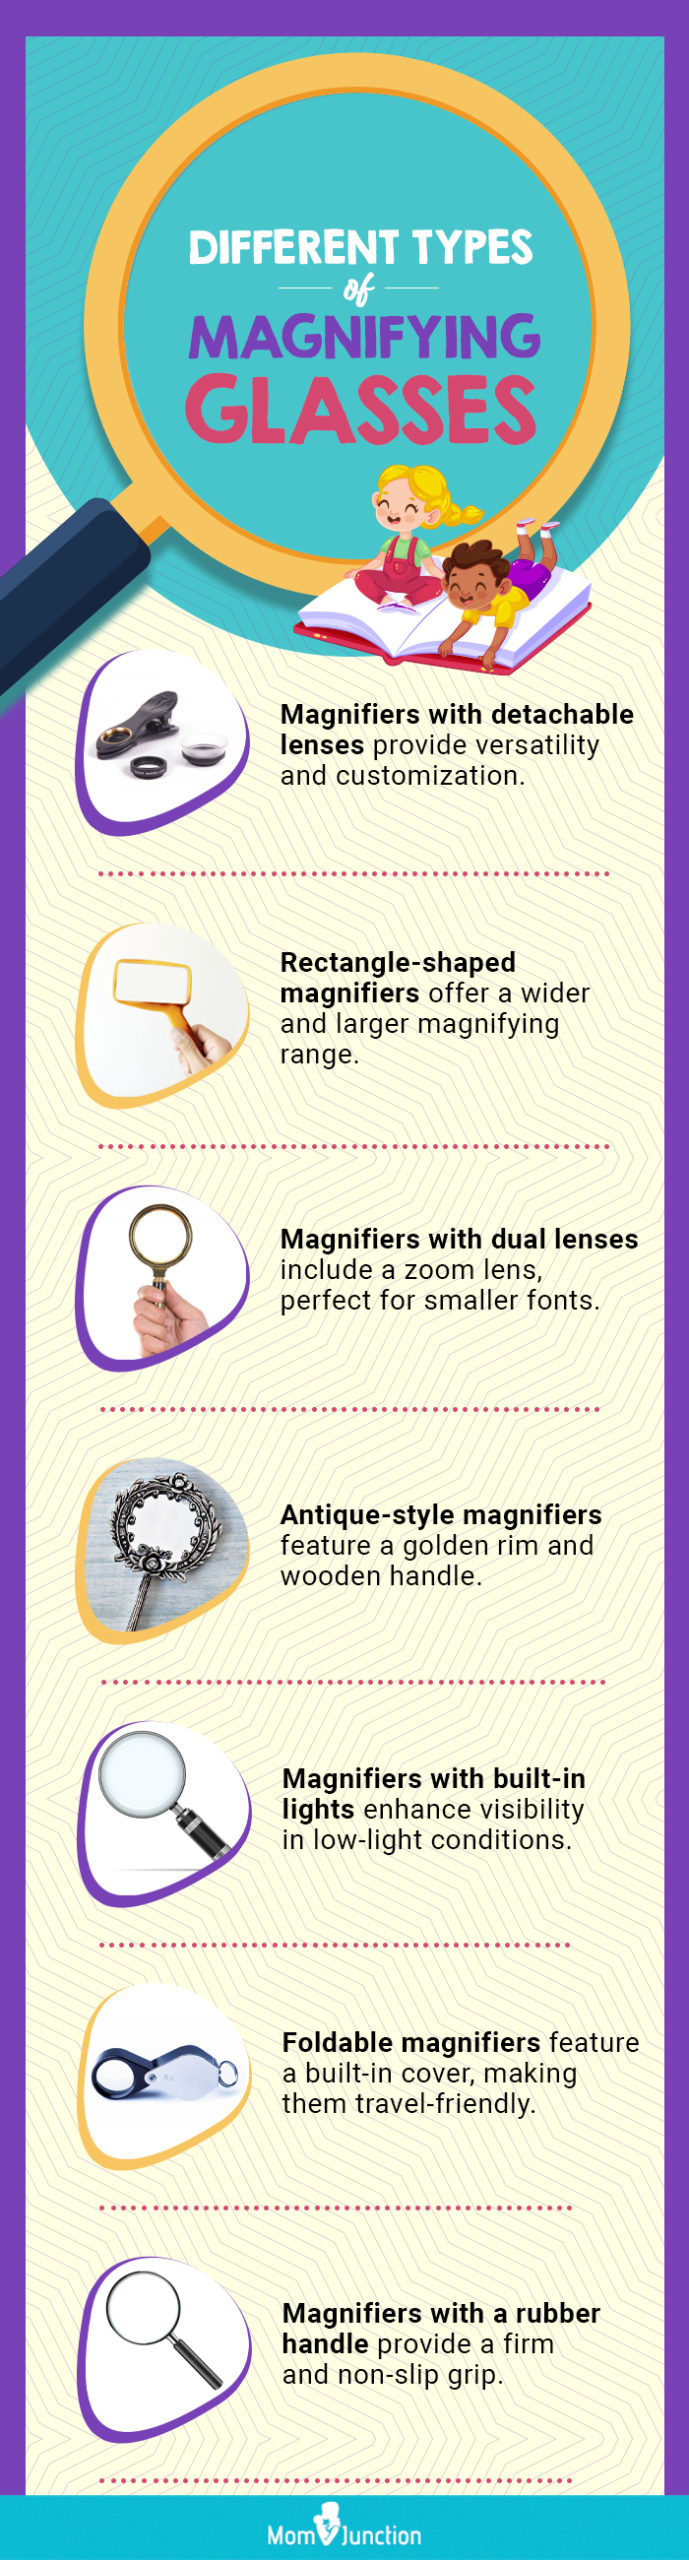 Different Types Of Magnifying Glasses (infographic)